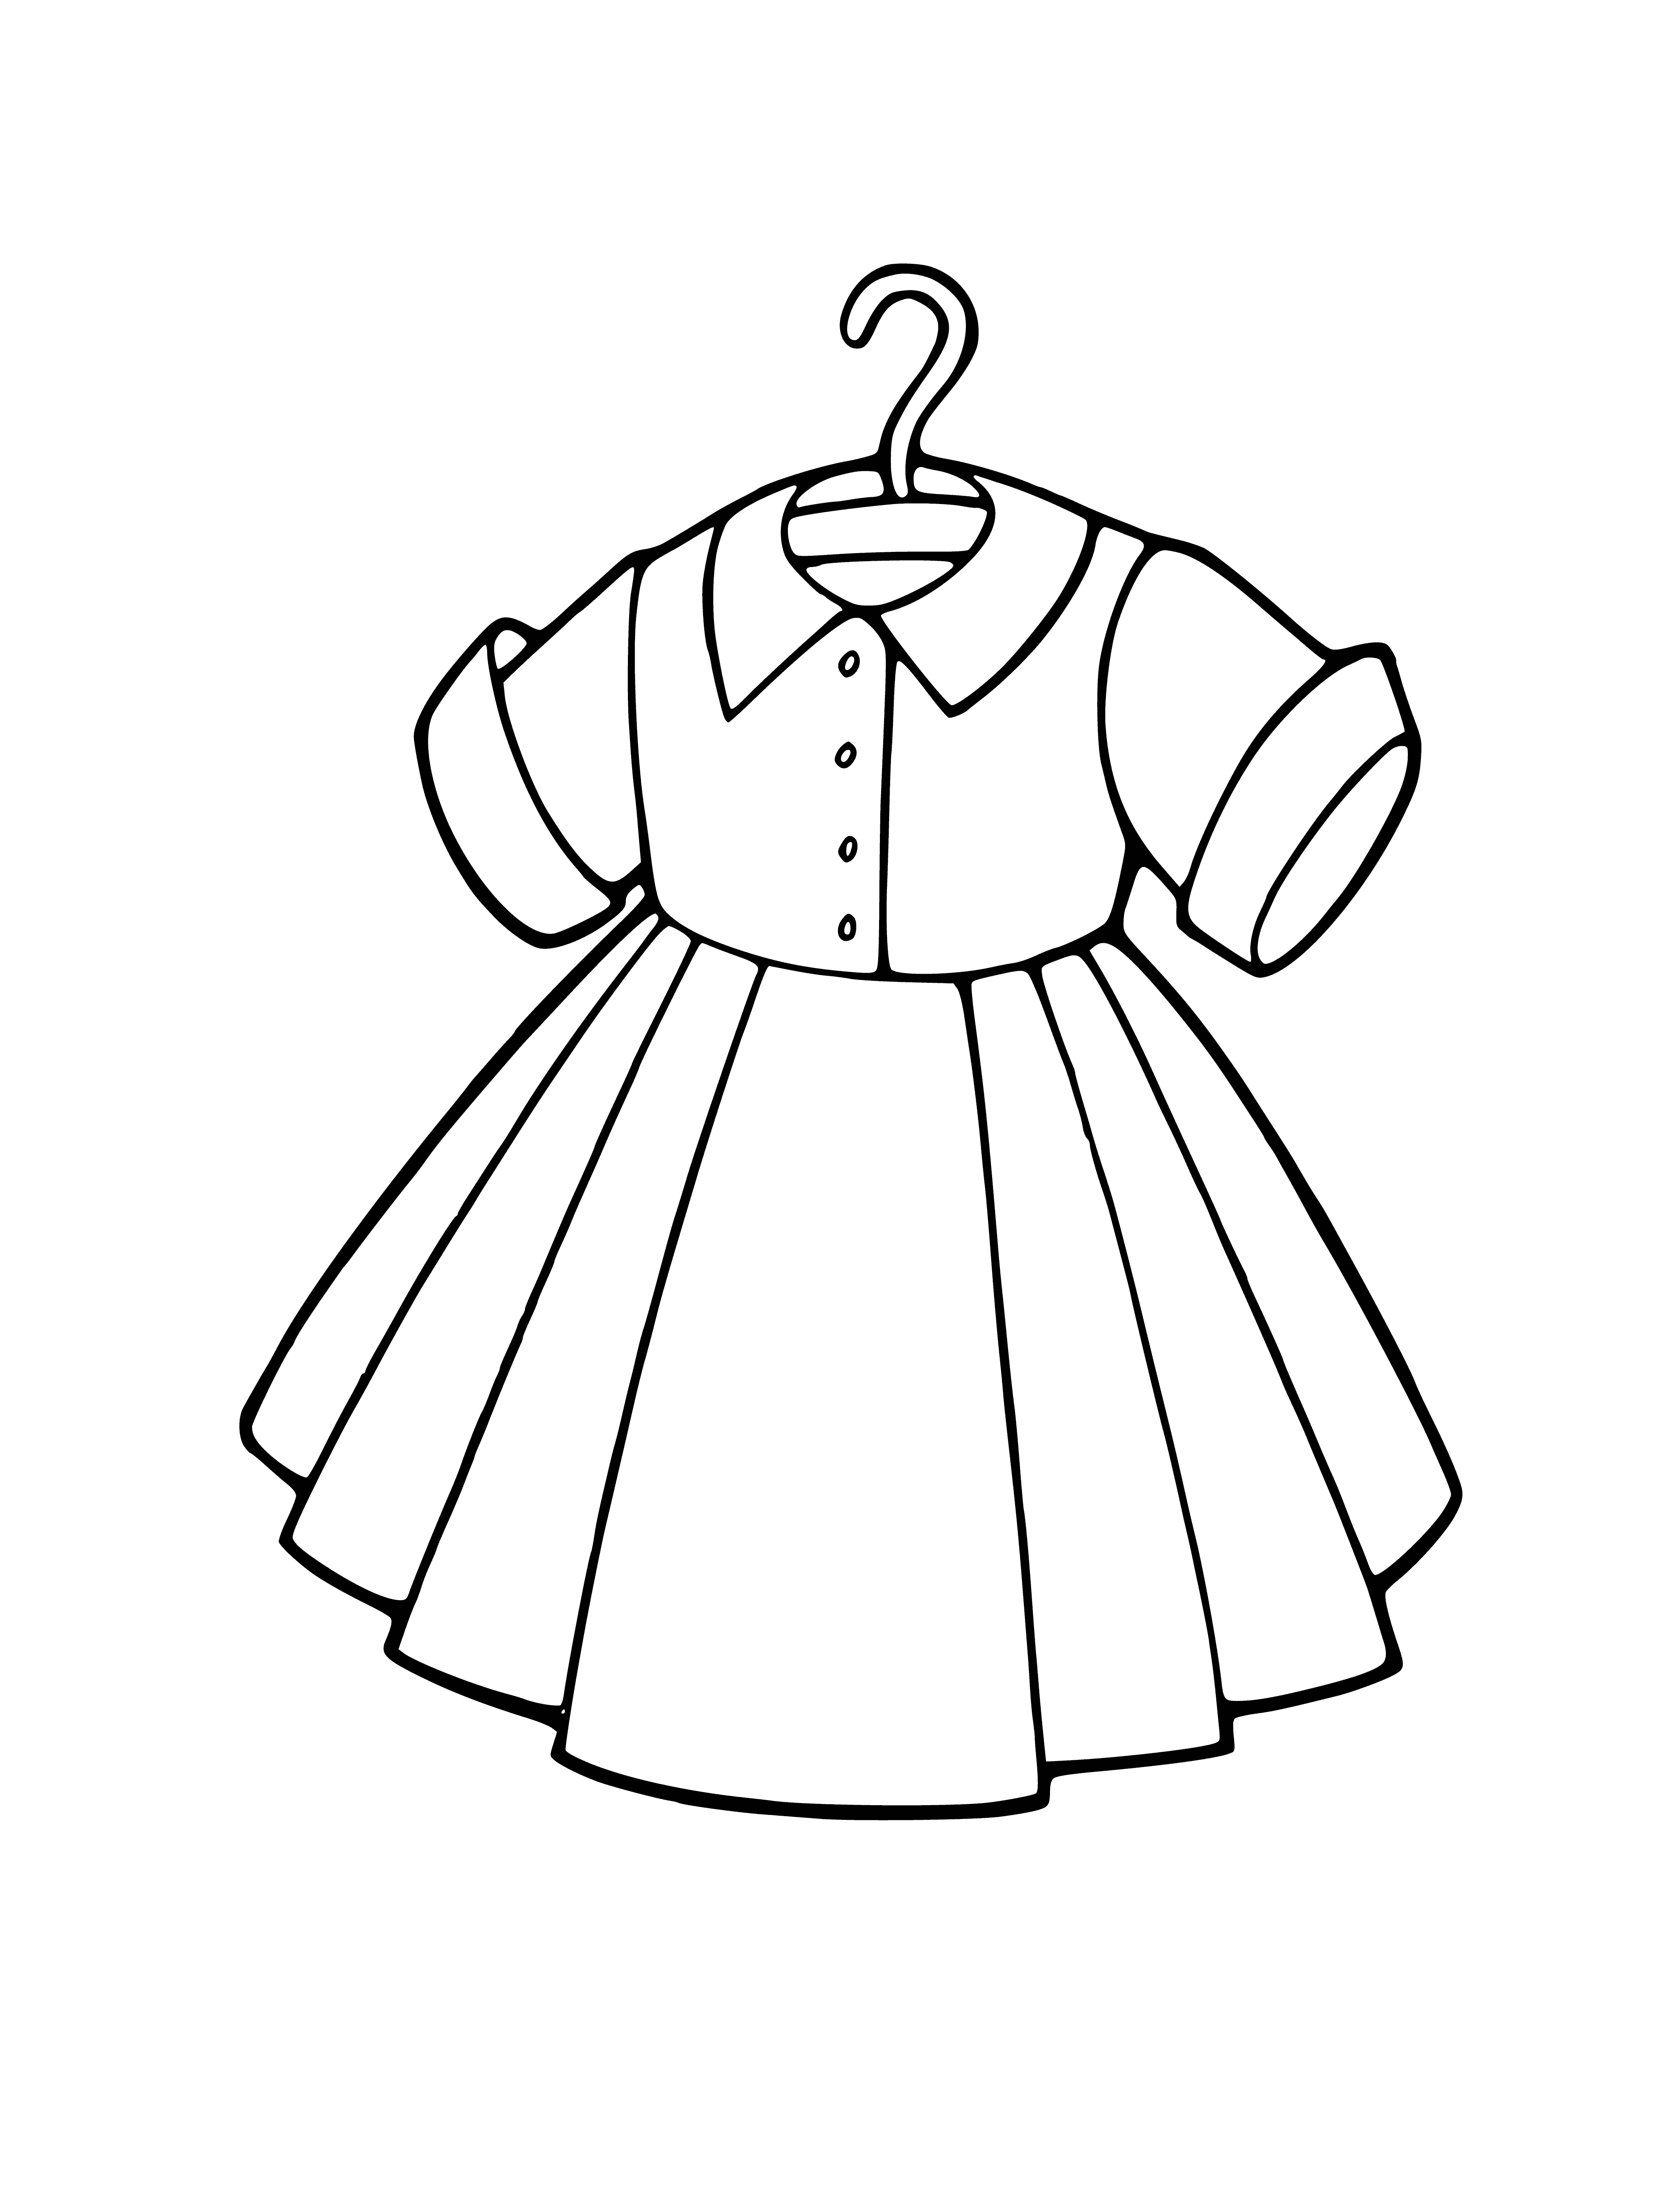 coloring page: Woman stands before mirror wearing light blue v-neck dress, loose updo, silver hoop earrings, & bracelet on her right wrist.